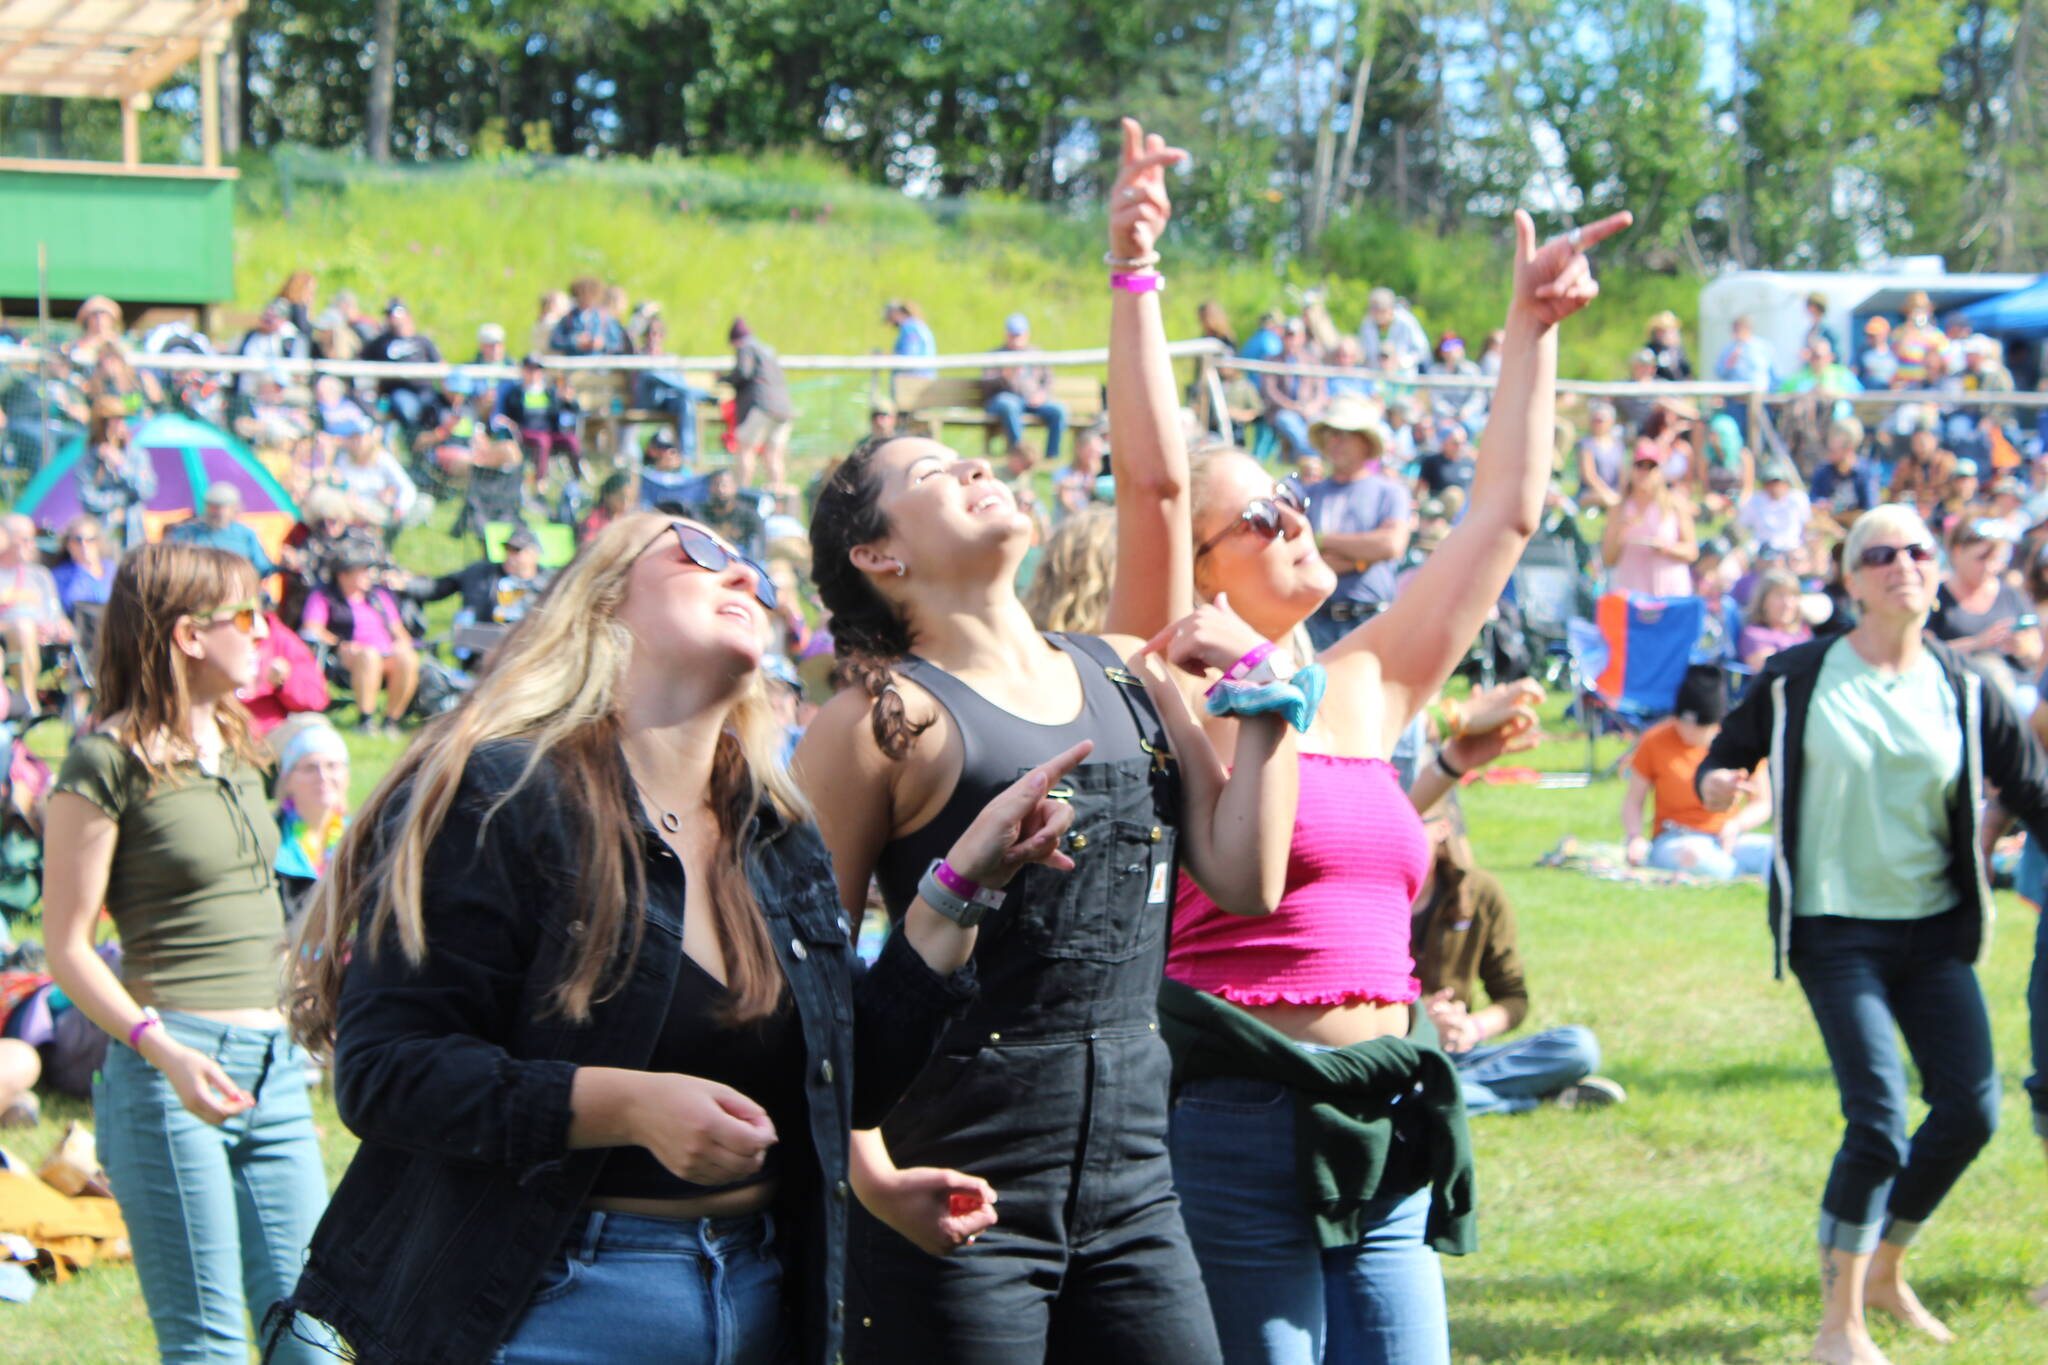 People gather in Ninilchik, Alaska, on Friday, August 5, 2022 for Salmonfest, an annual event that raises awareness about salmon-related causes. (Camille Botello/Peninsula Clarion)